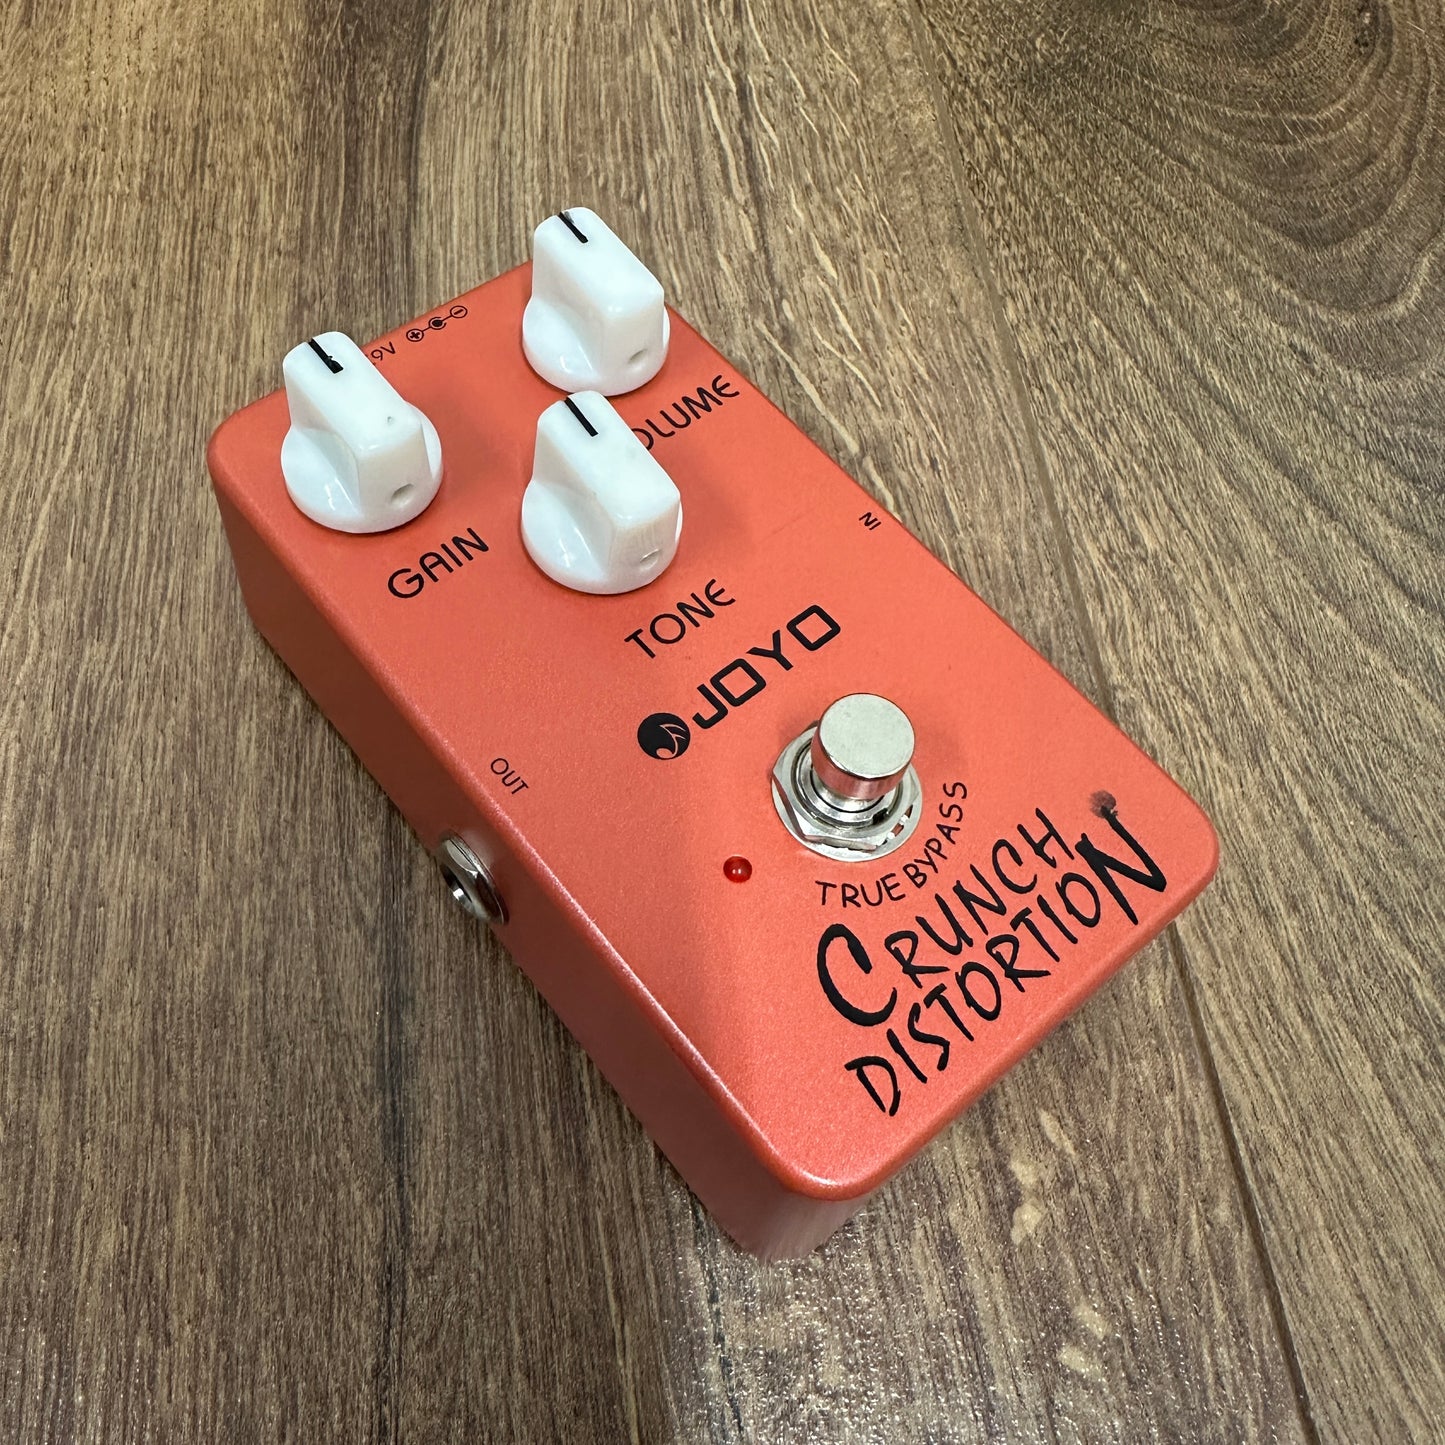 Pre-Owned Joyo Jf-03 Crunch Distortion Guitar Effect Pedal